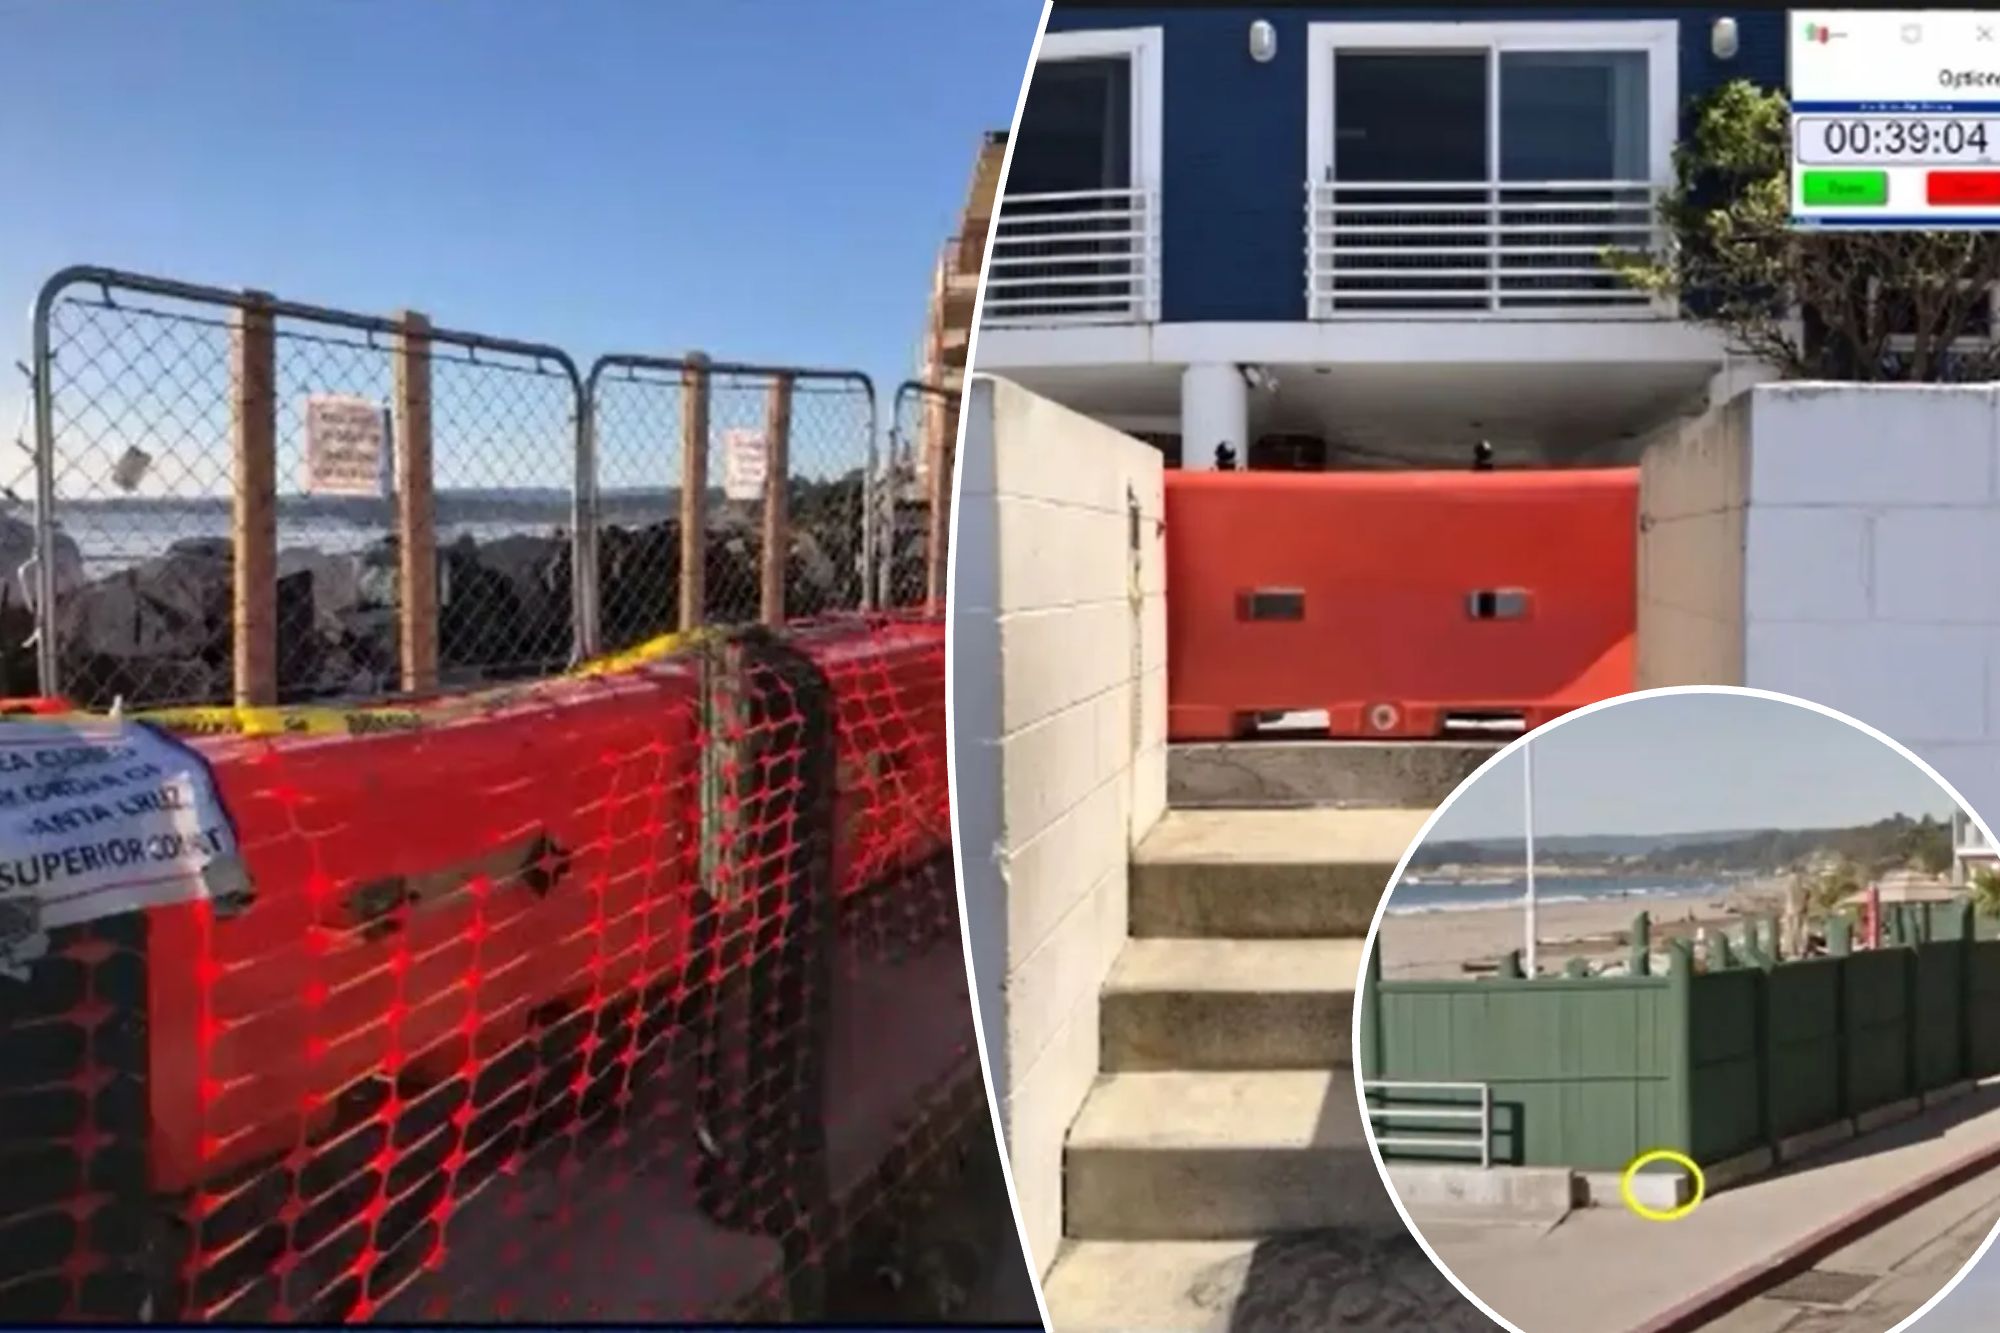 Wealthy Calif. HOA erects fence blocking beach access — despite $4.7M in fines